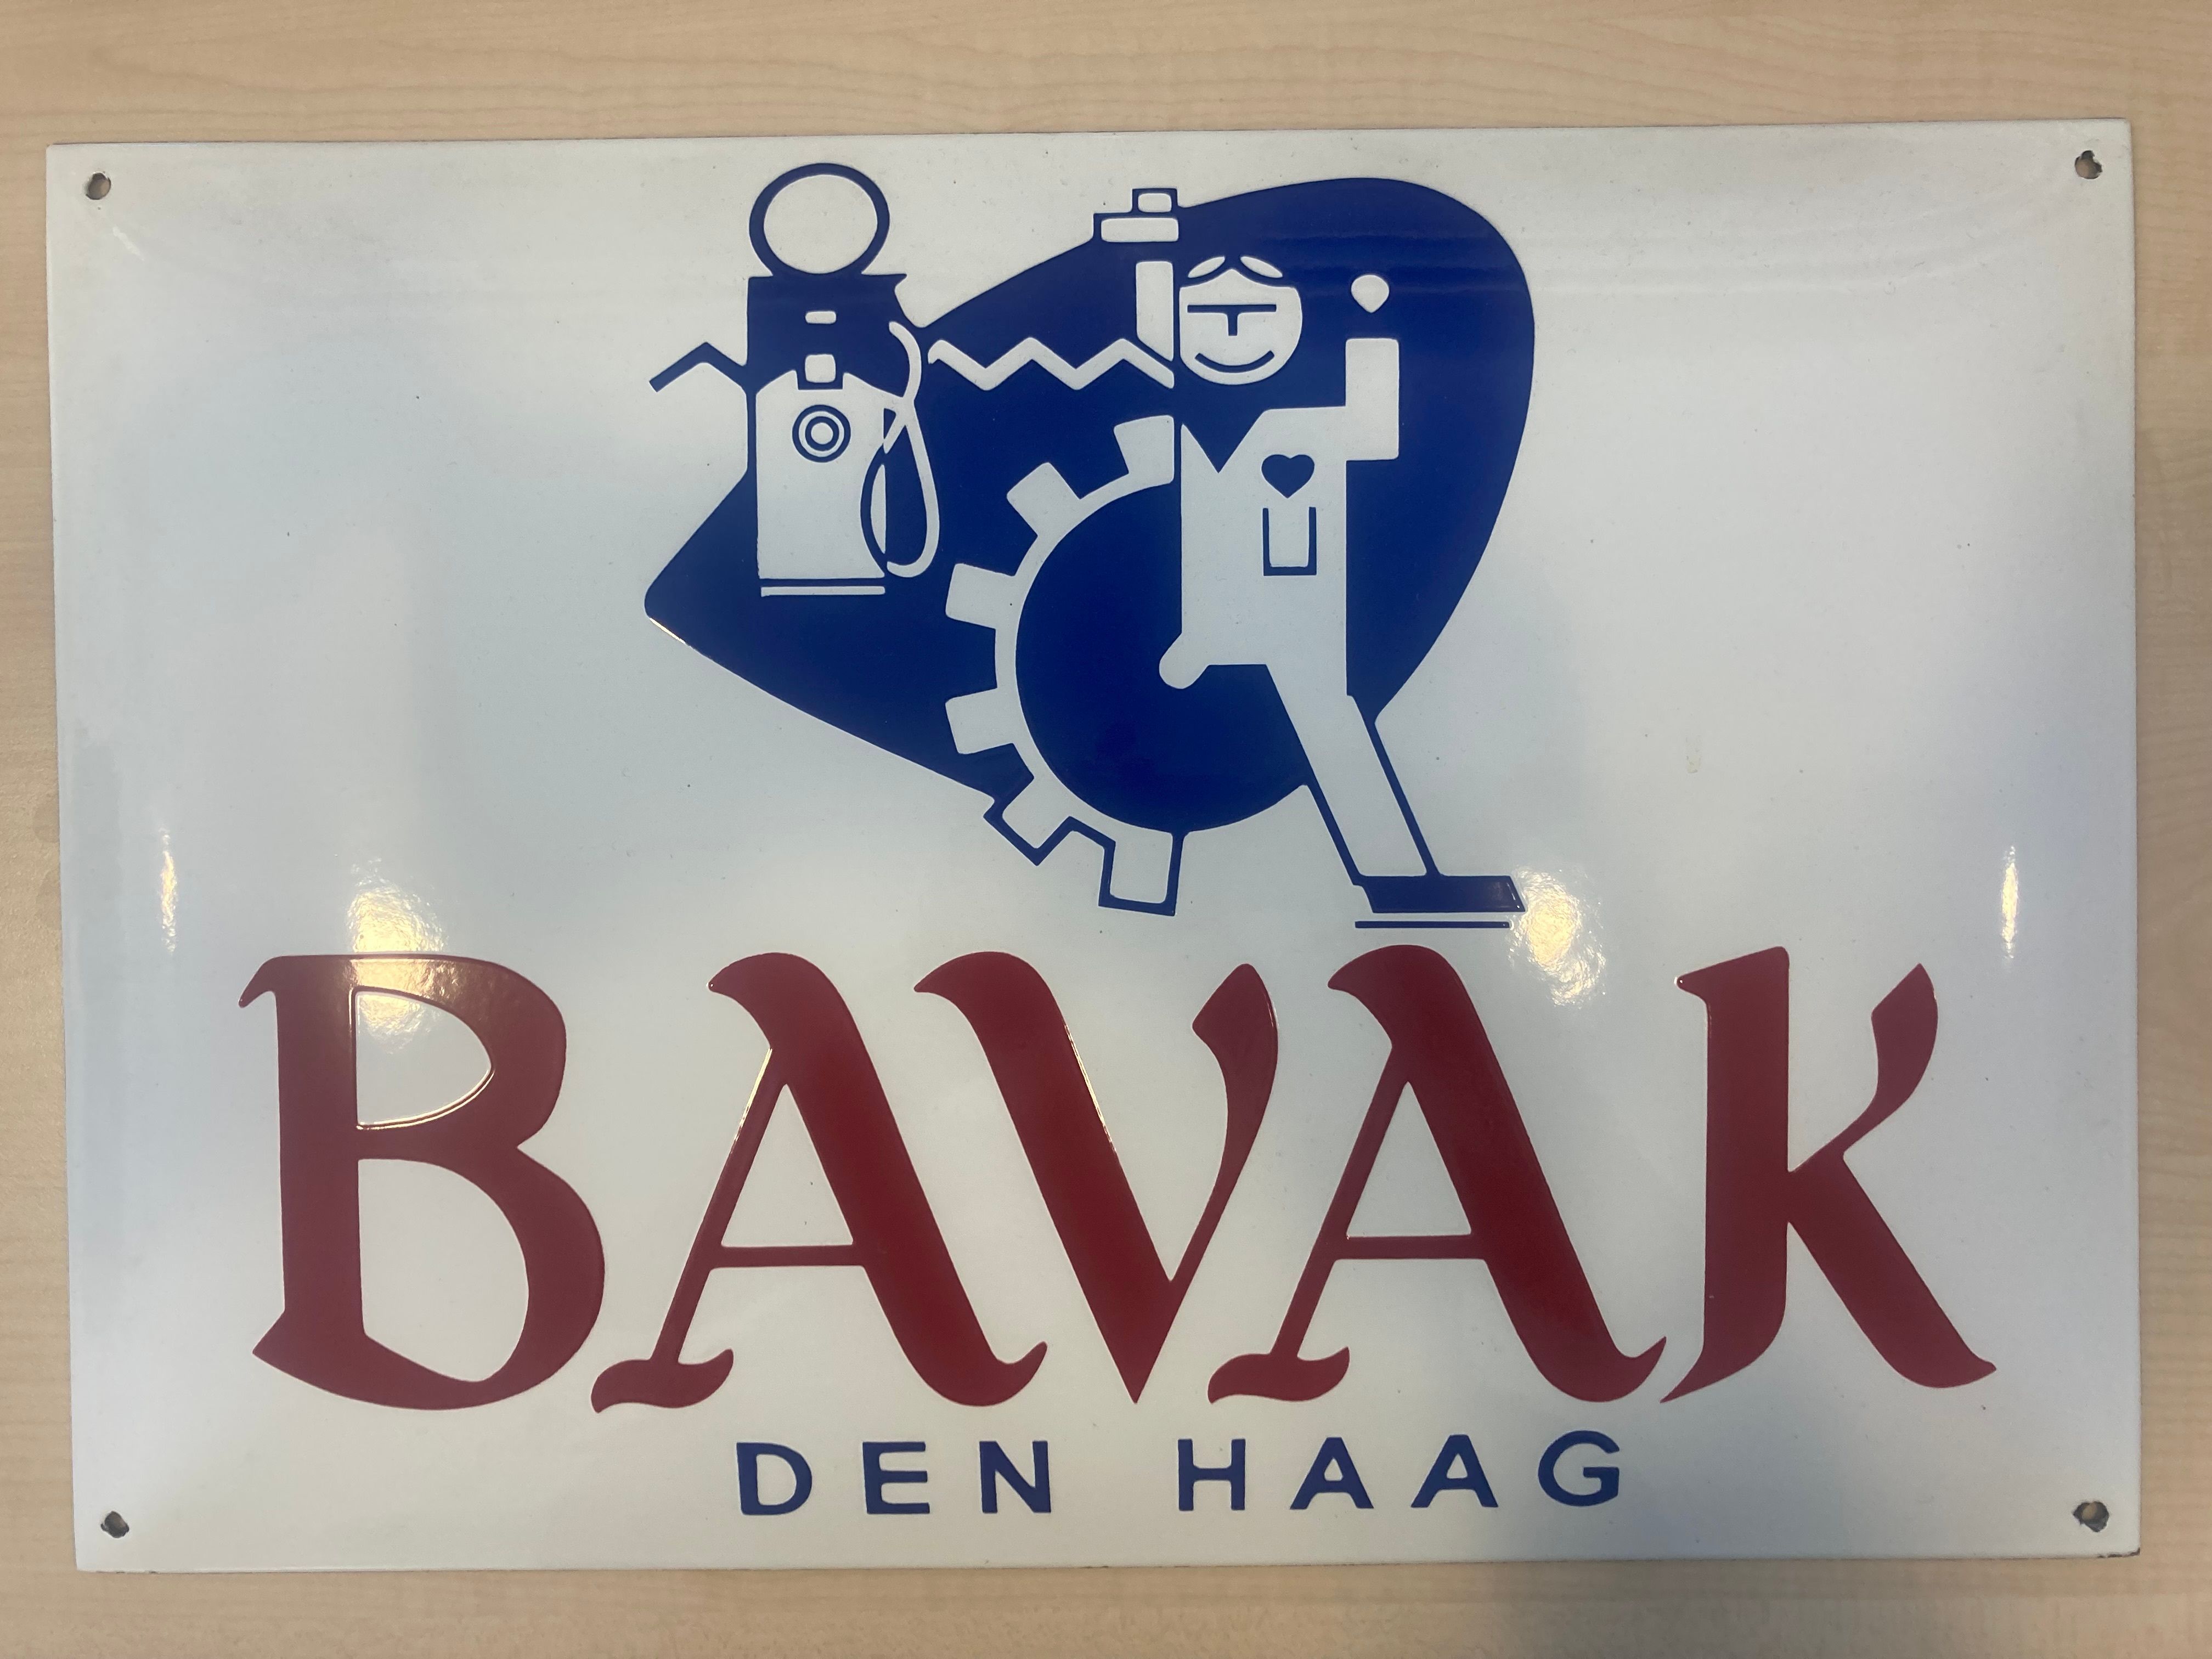 The history of Bavak Security Group